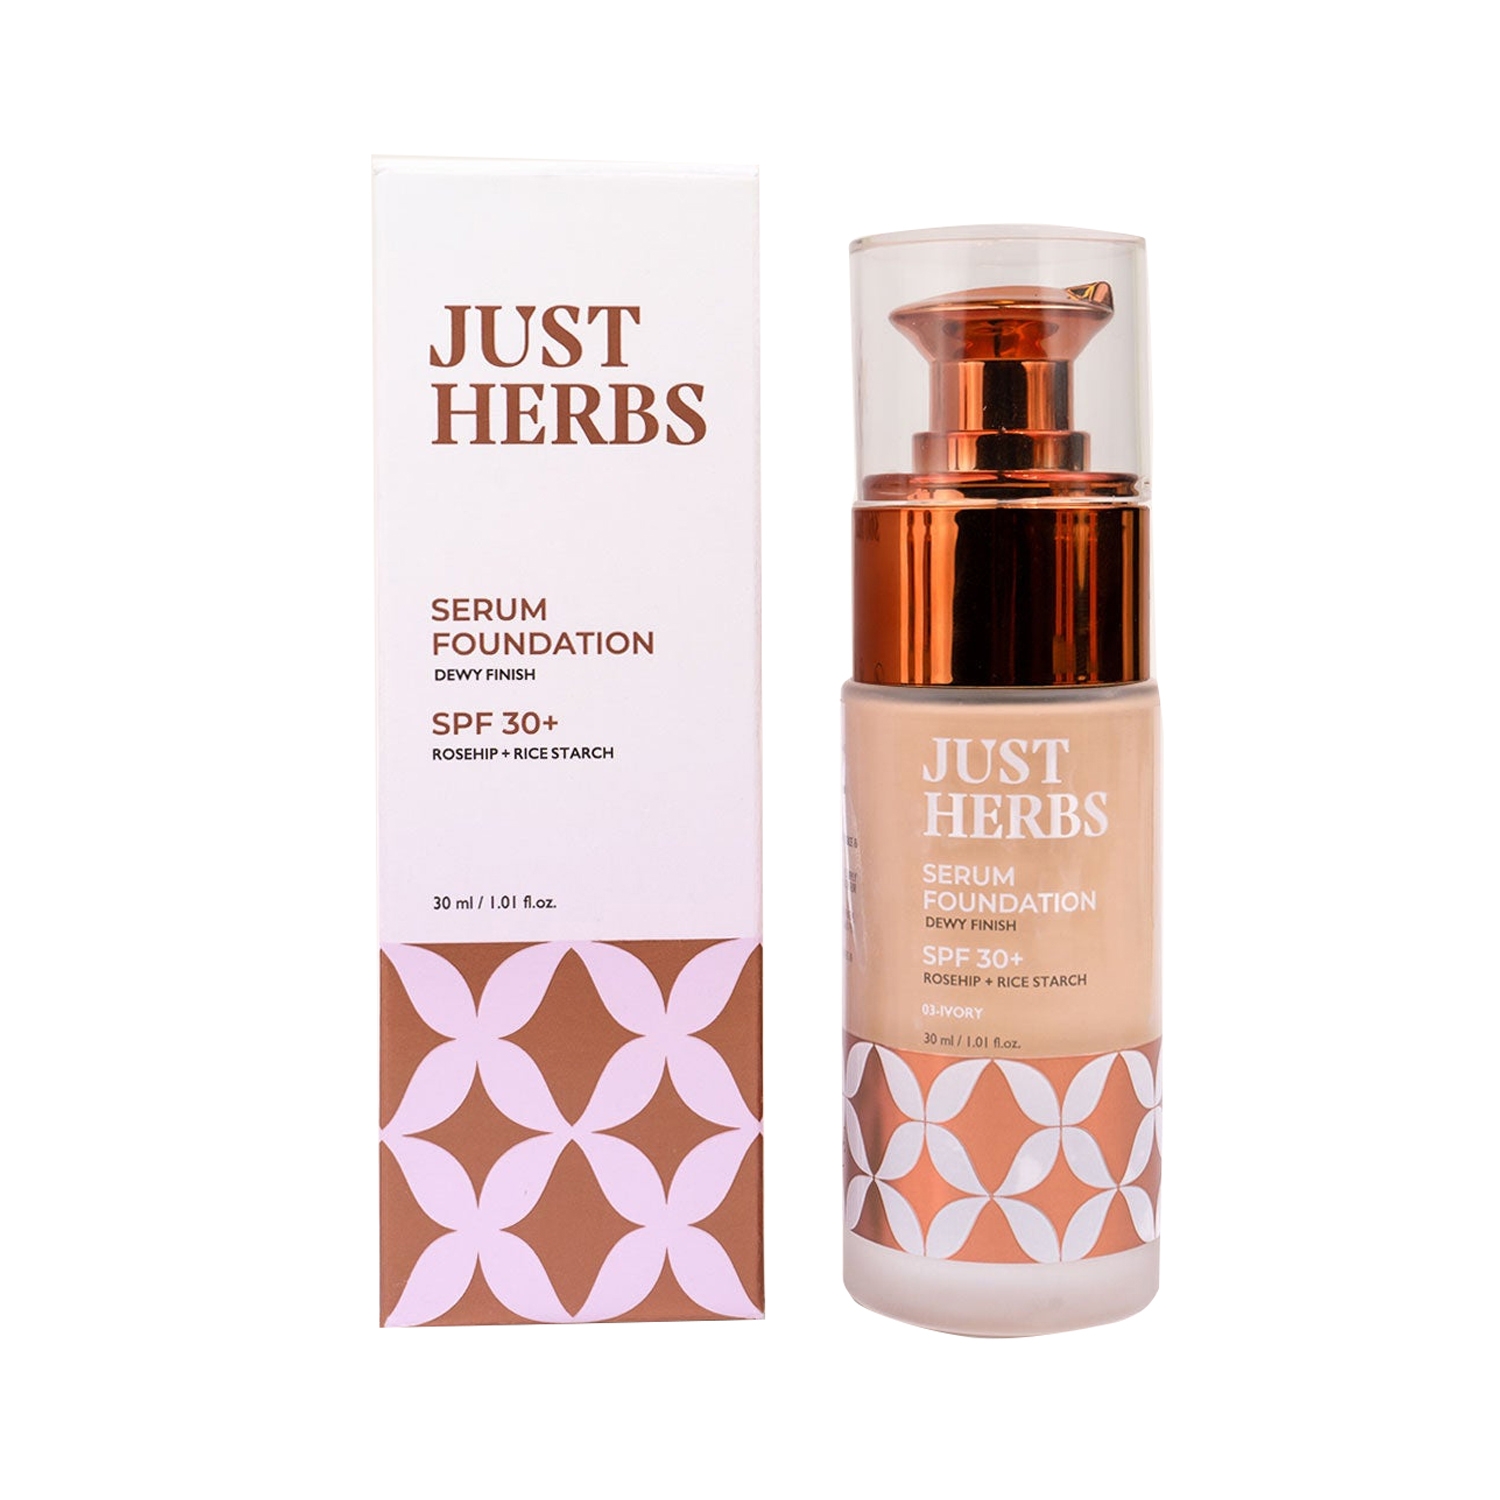 Just Herbs | Just Herbs Dewy Finish Serum Foundation SPF 30+ - 03 Ivory (30ml)